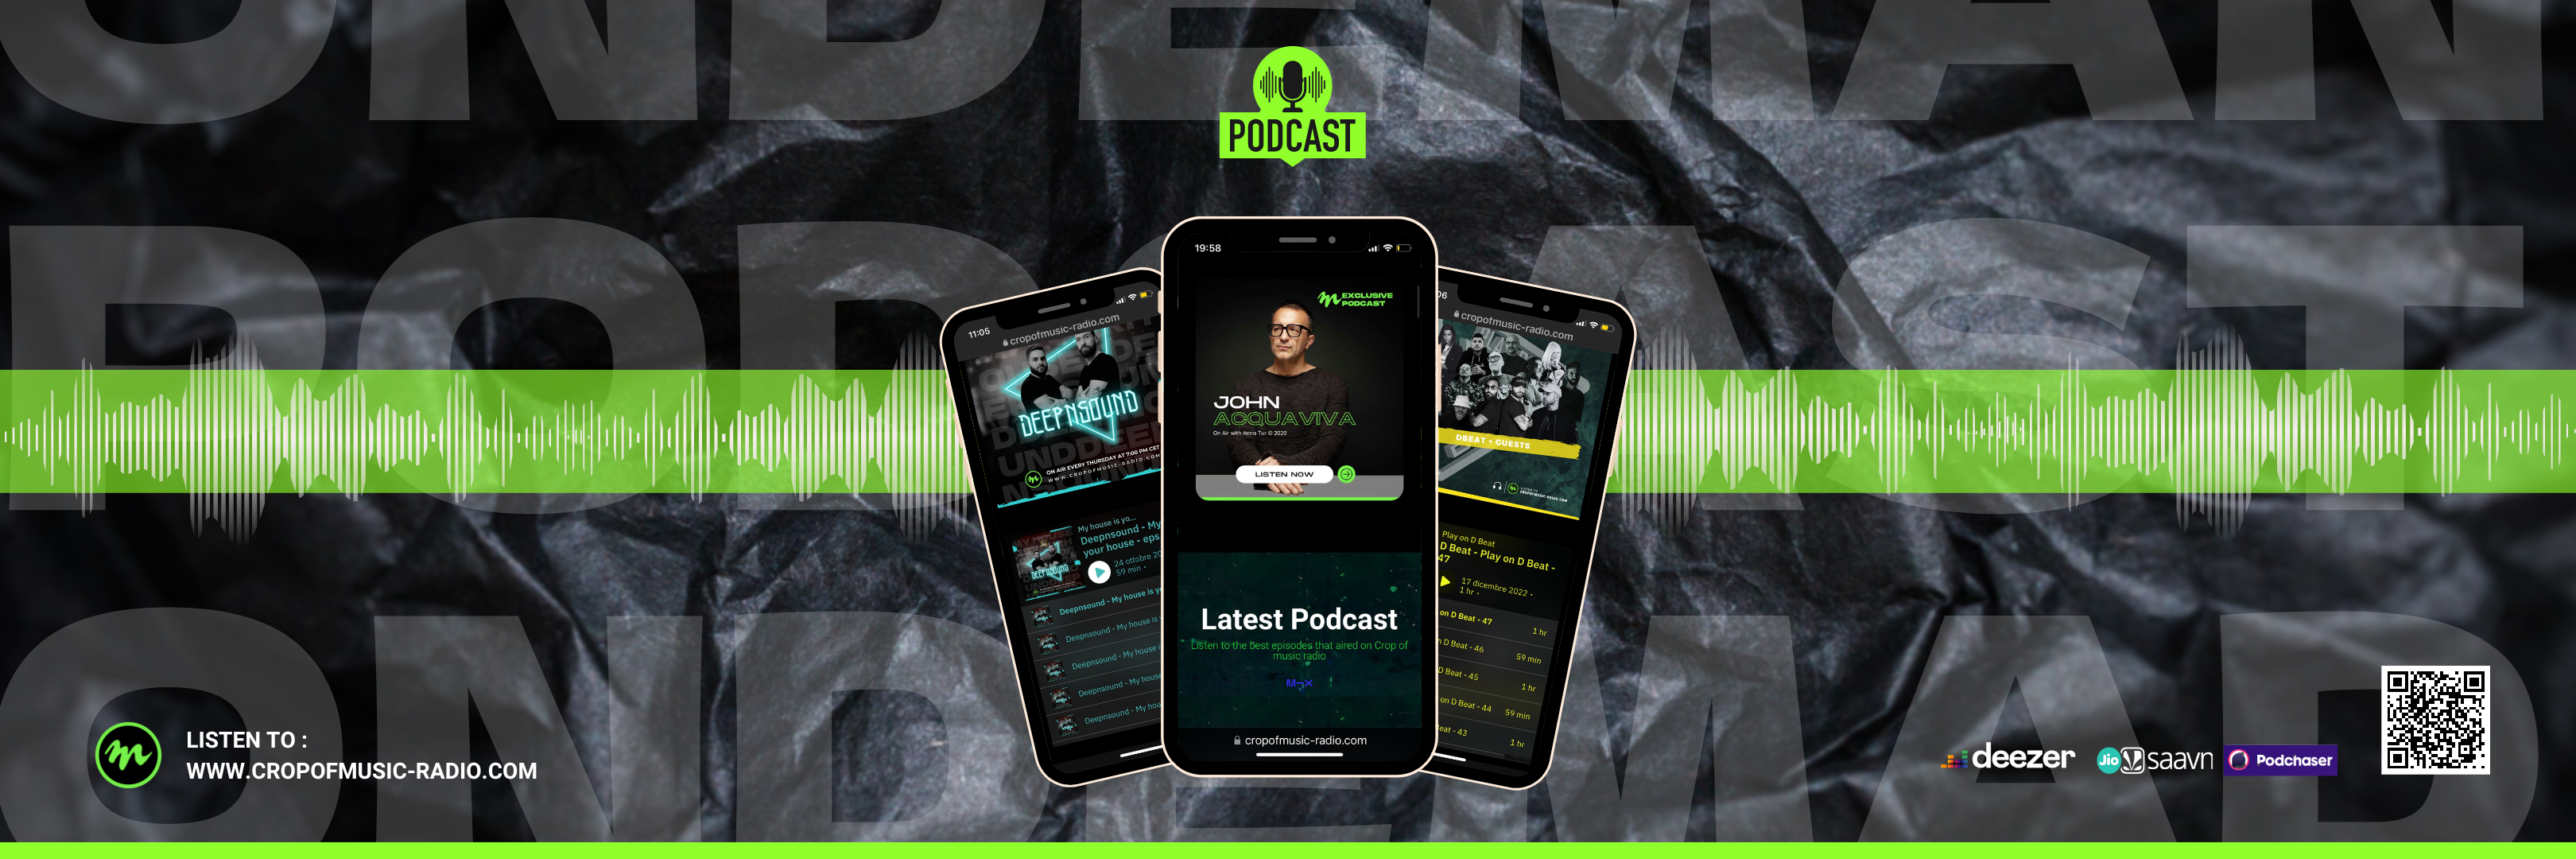 PODCAST ON DEMAND (1080 × 1080 px) (3240 × 1080 px)